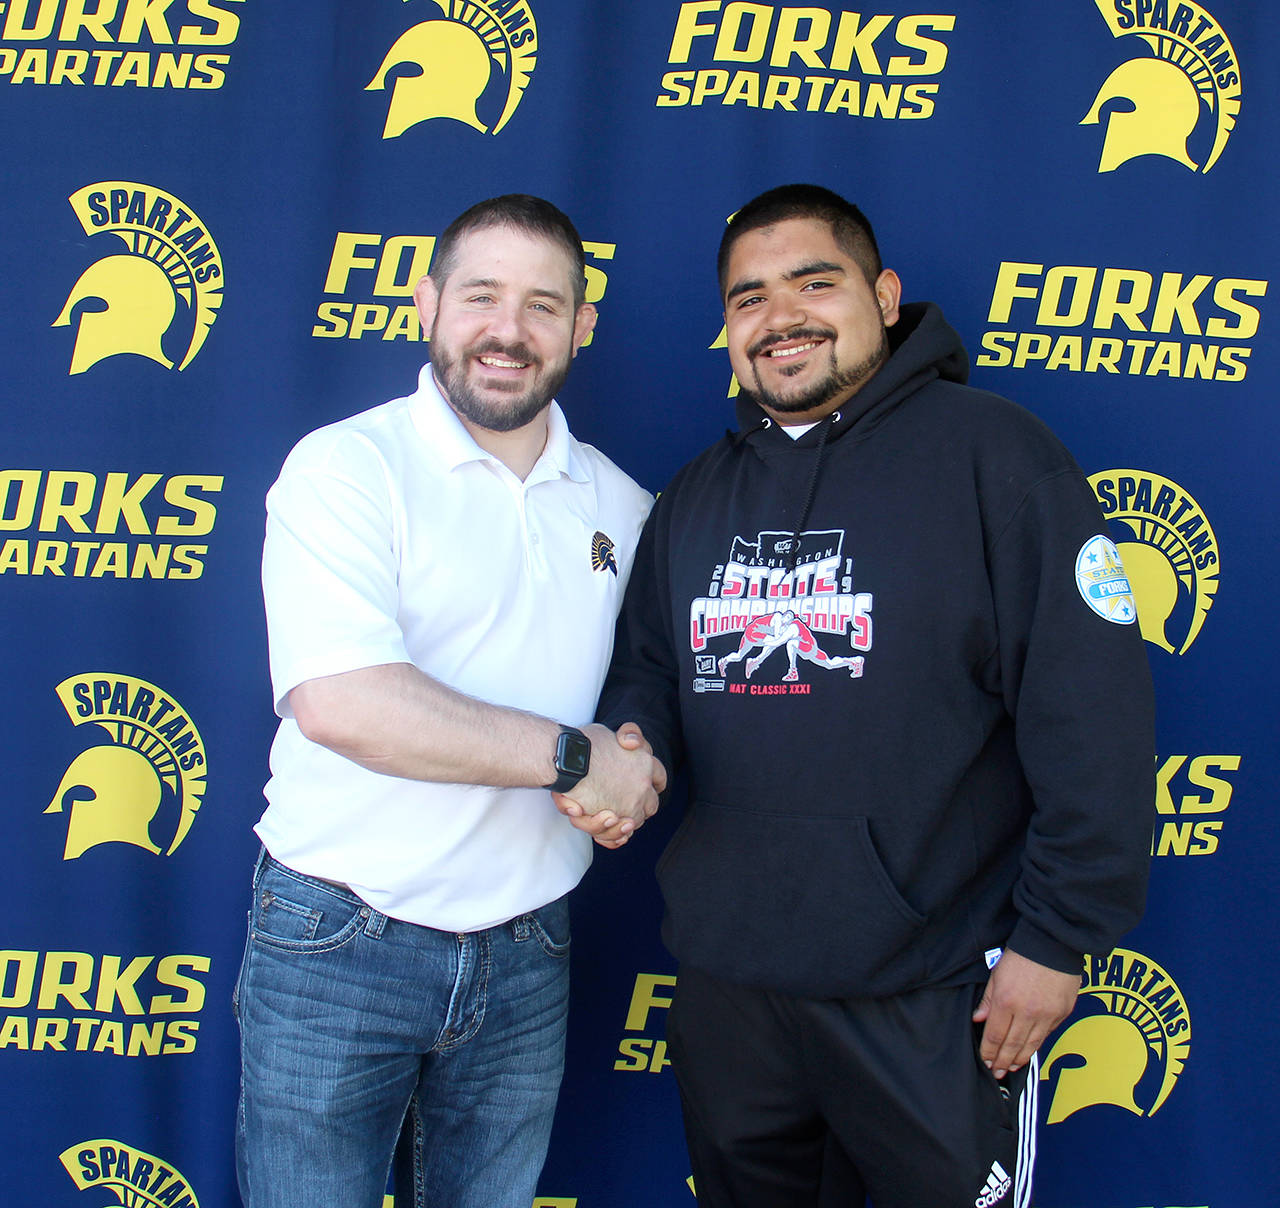 Forks’ Eden Ciseneros, right, is congratulated by Forks athletic director Kyle Weakley, after being awarded the Dick Grabenhorst Memorial Scholarship. Cisneros, a senior who plans to attend Pacific Lutheran University, played football, placed sixth at the state wrestling meet and was on the Spartans’ state soccer team this school year.                                Christi Baron/Olympic Peninsula News Group